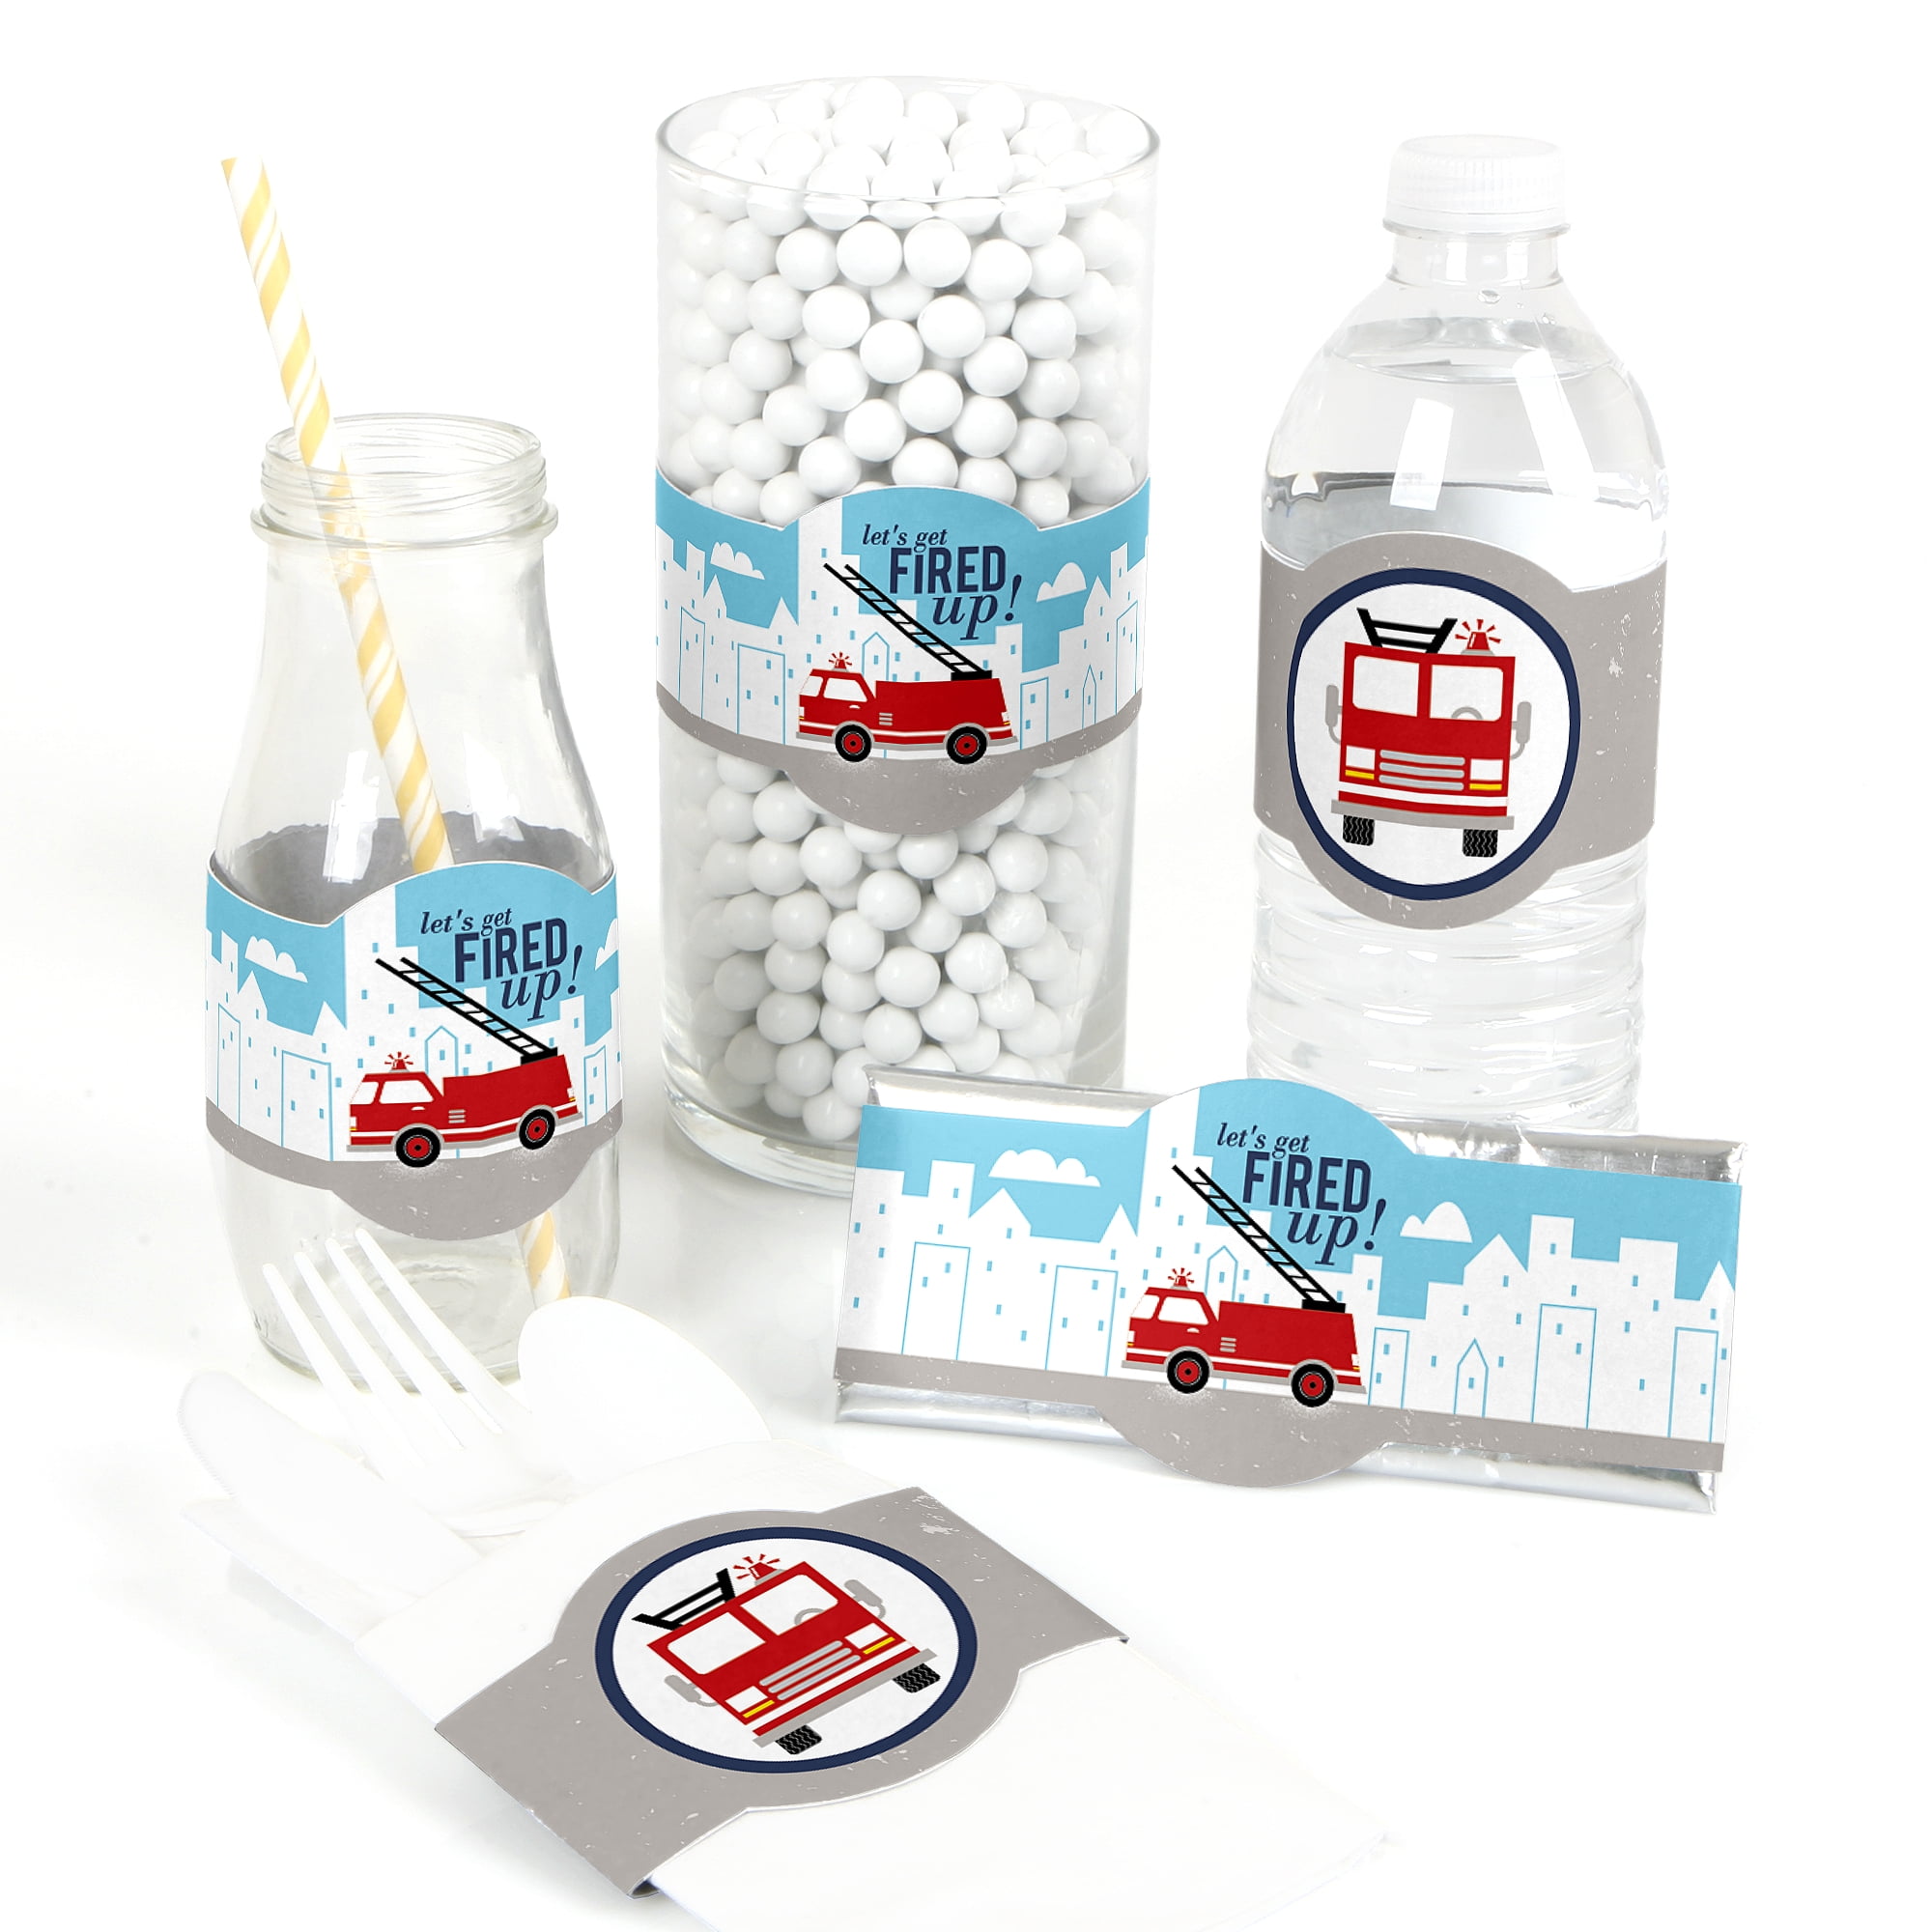 DIY Party Supplies Firefighter Firetruck Baby Shower or Birthday Party DIY Wrapper Favors and Decorations Set of 15 Fired Up Fire Truck 